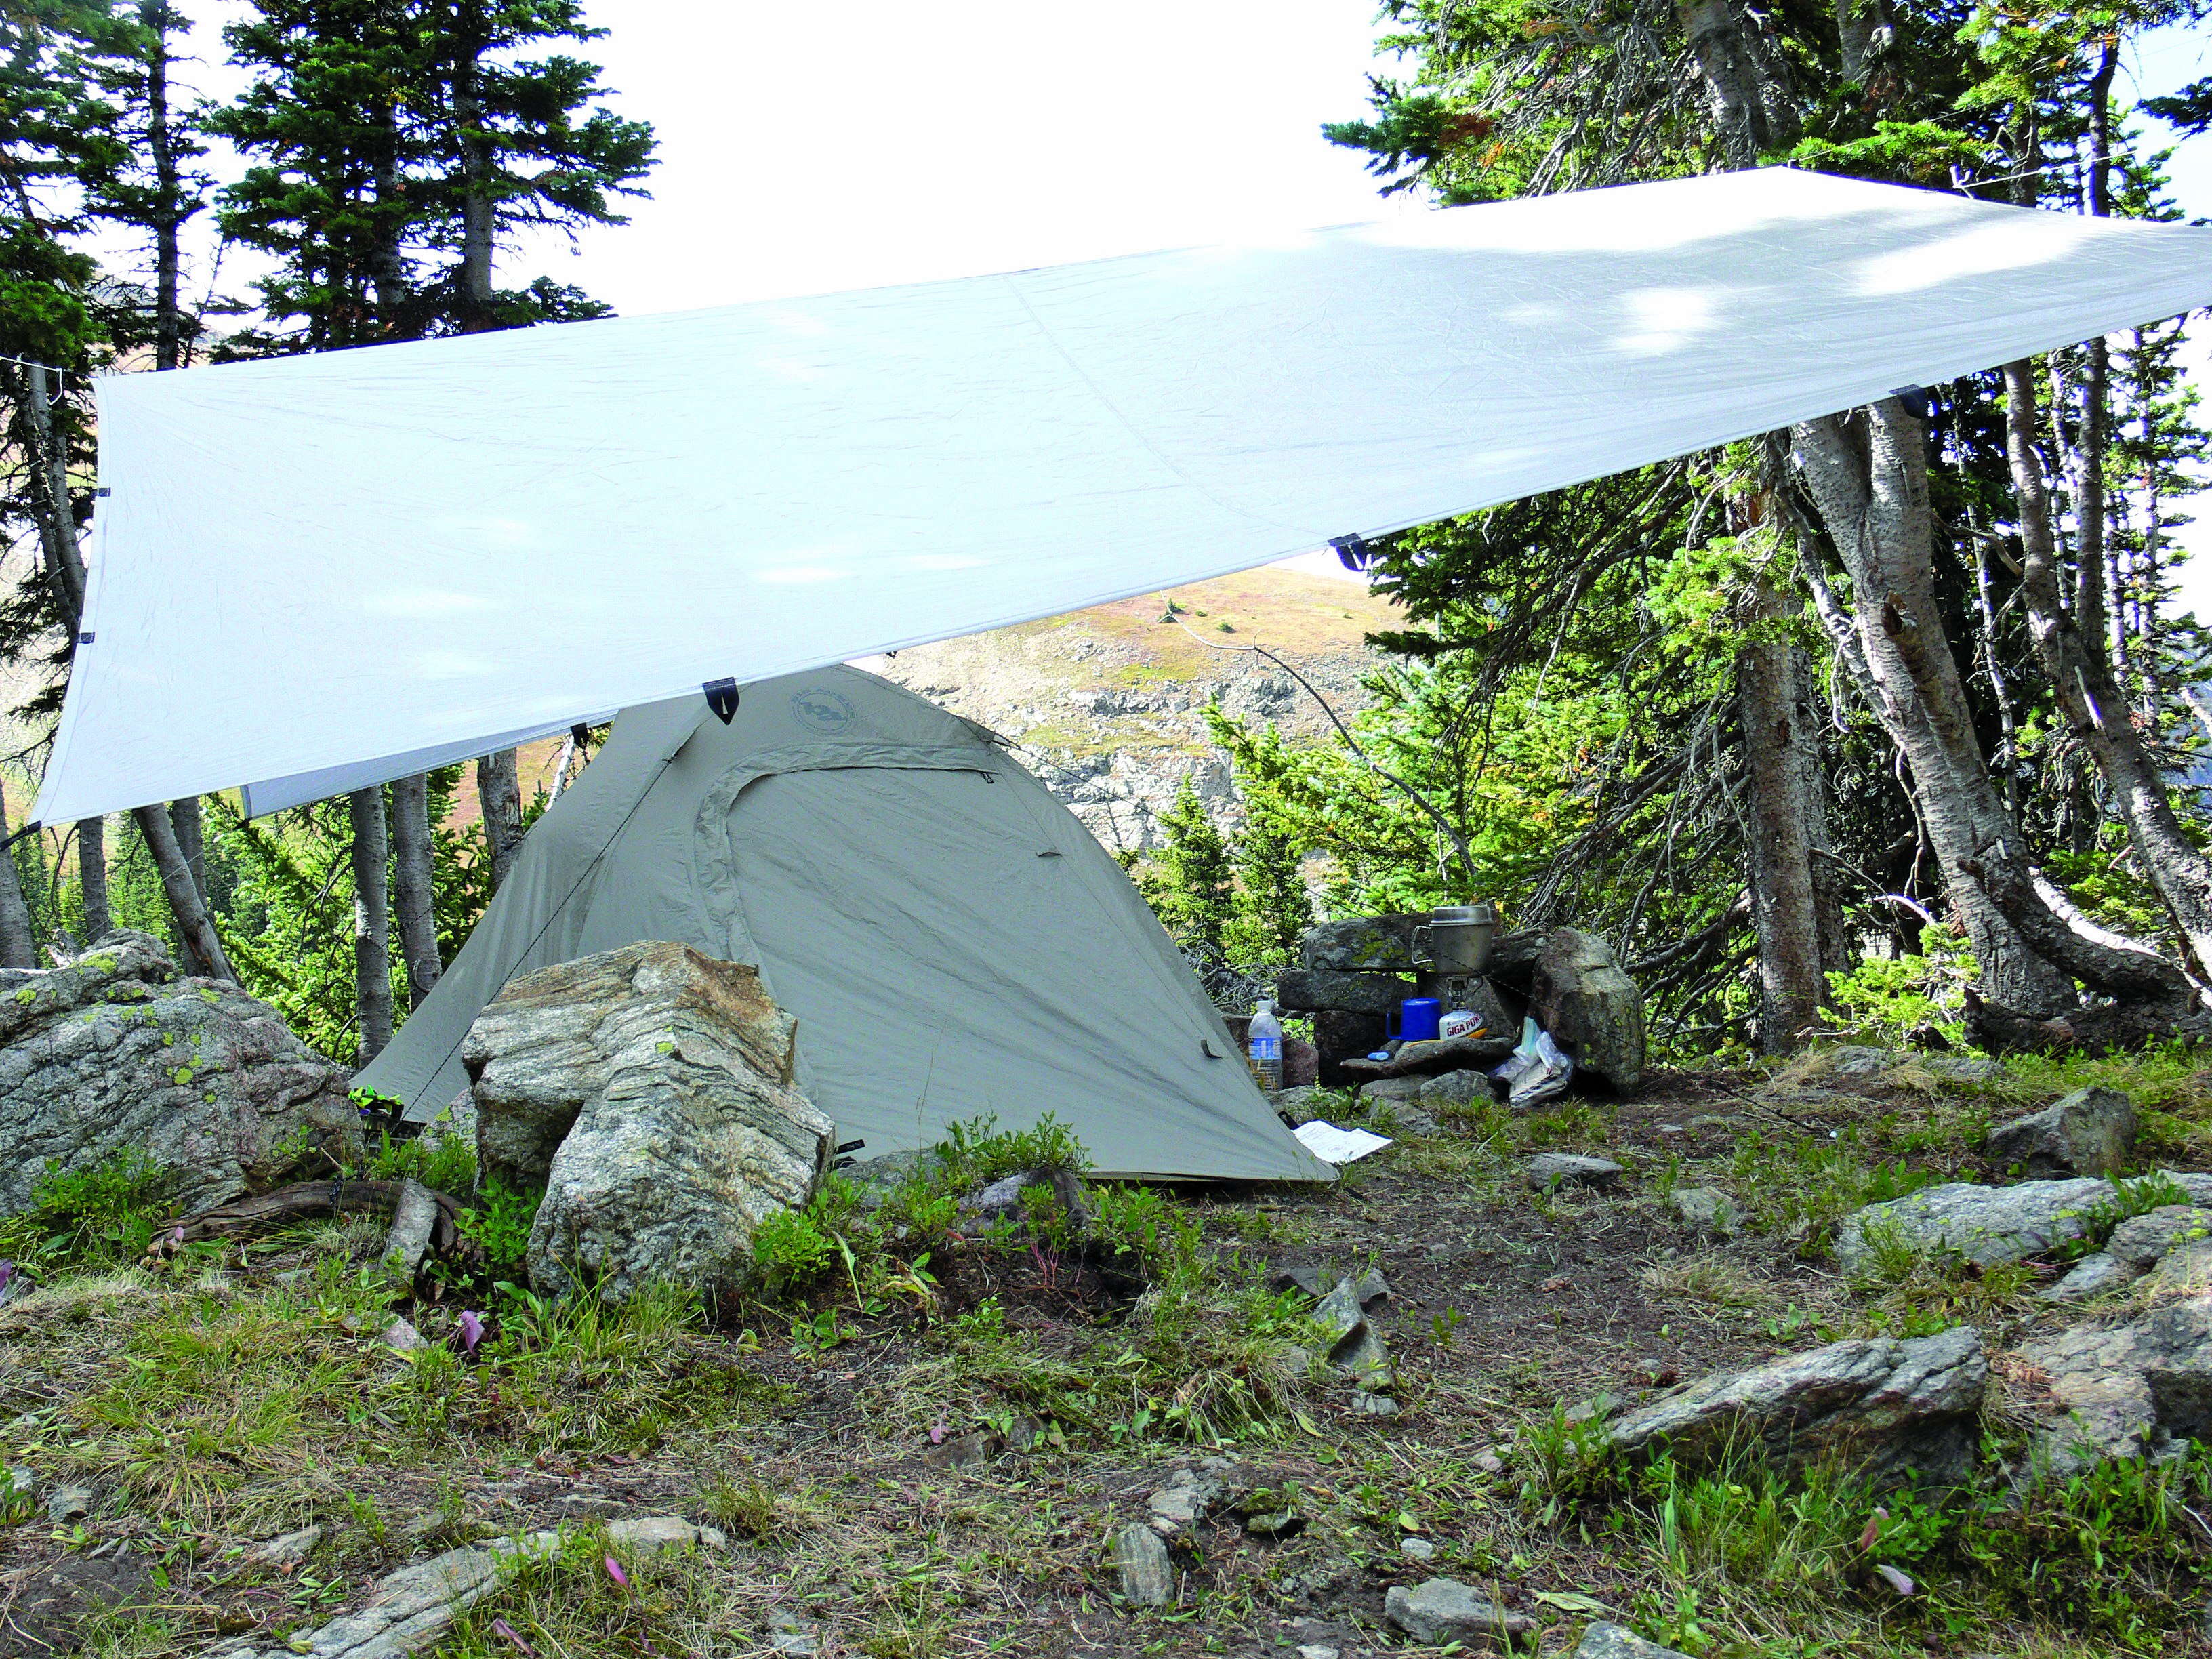 A camp set up while bowhunting mule deer above timberline.